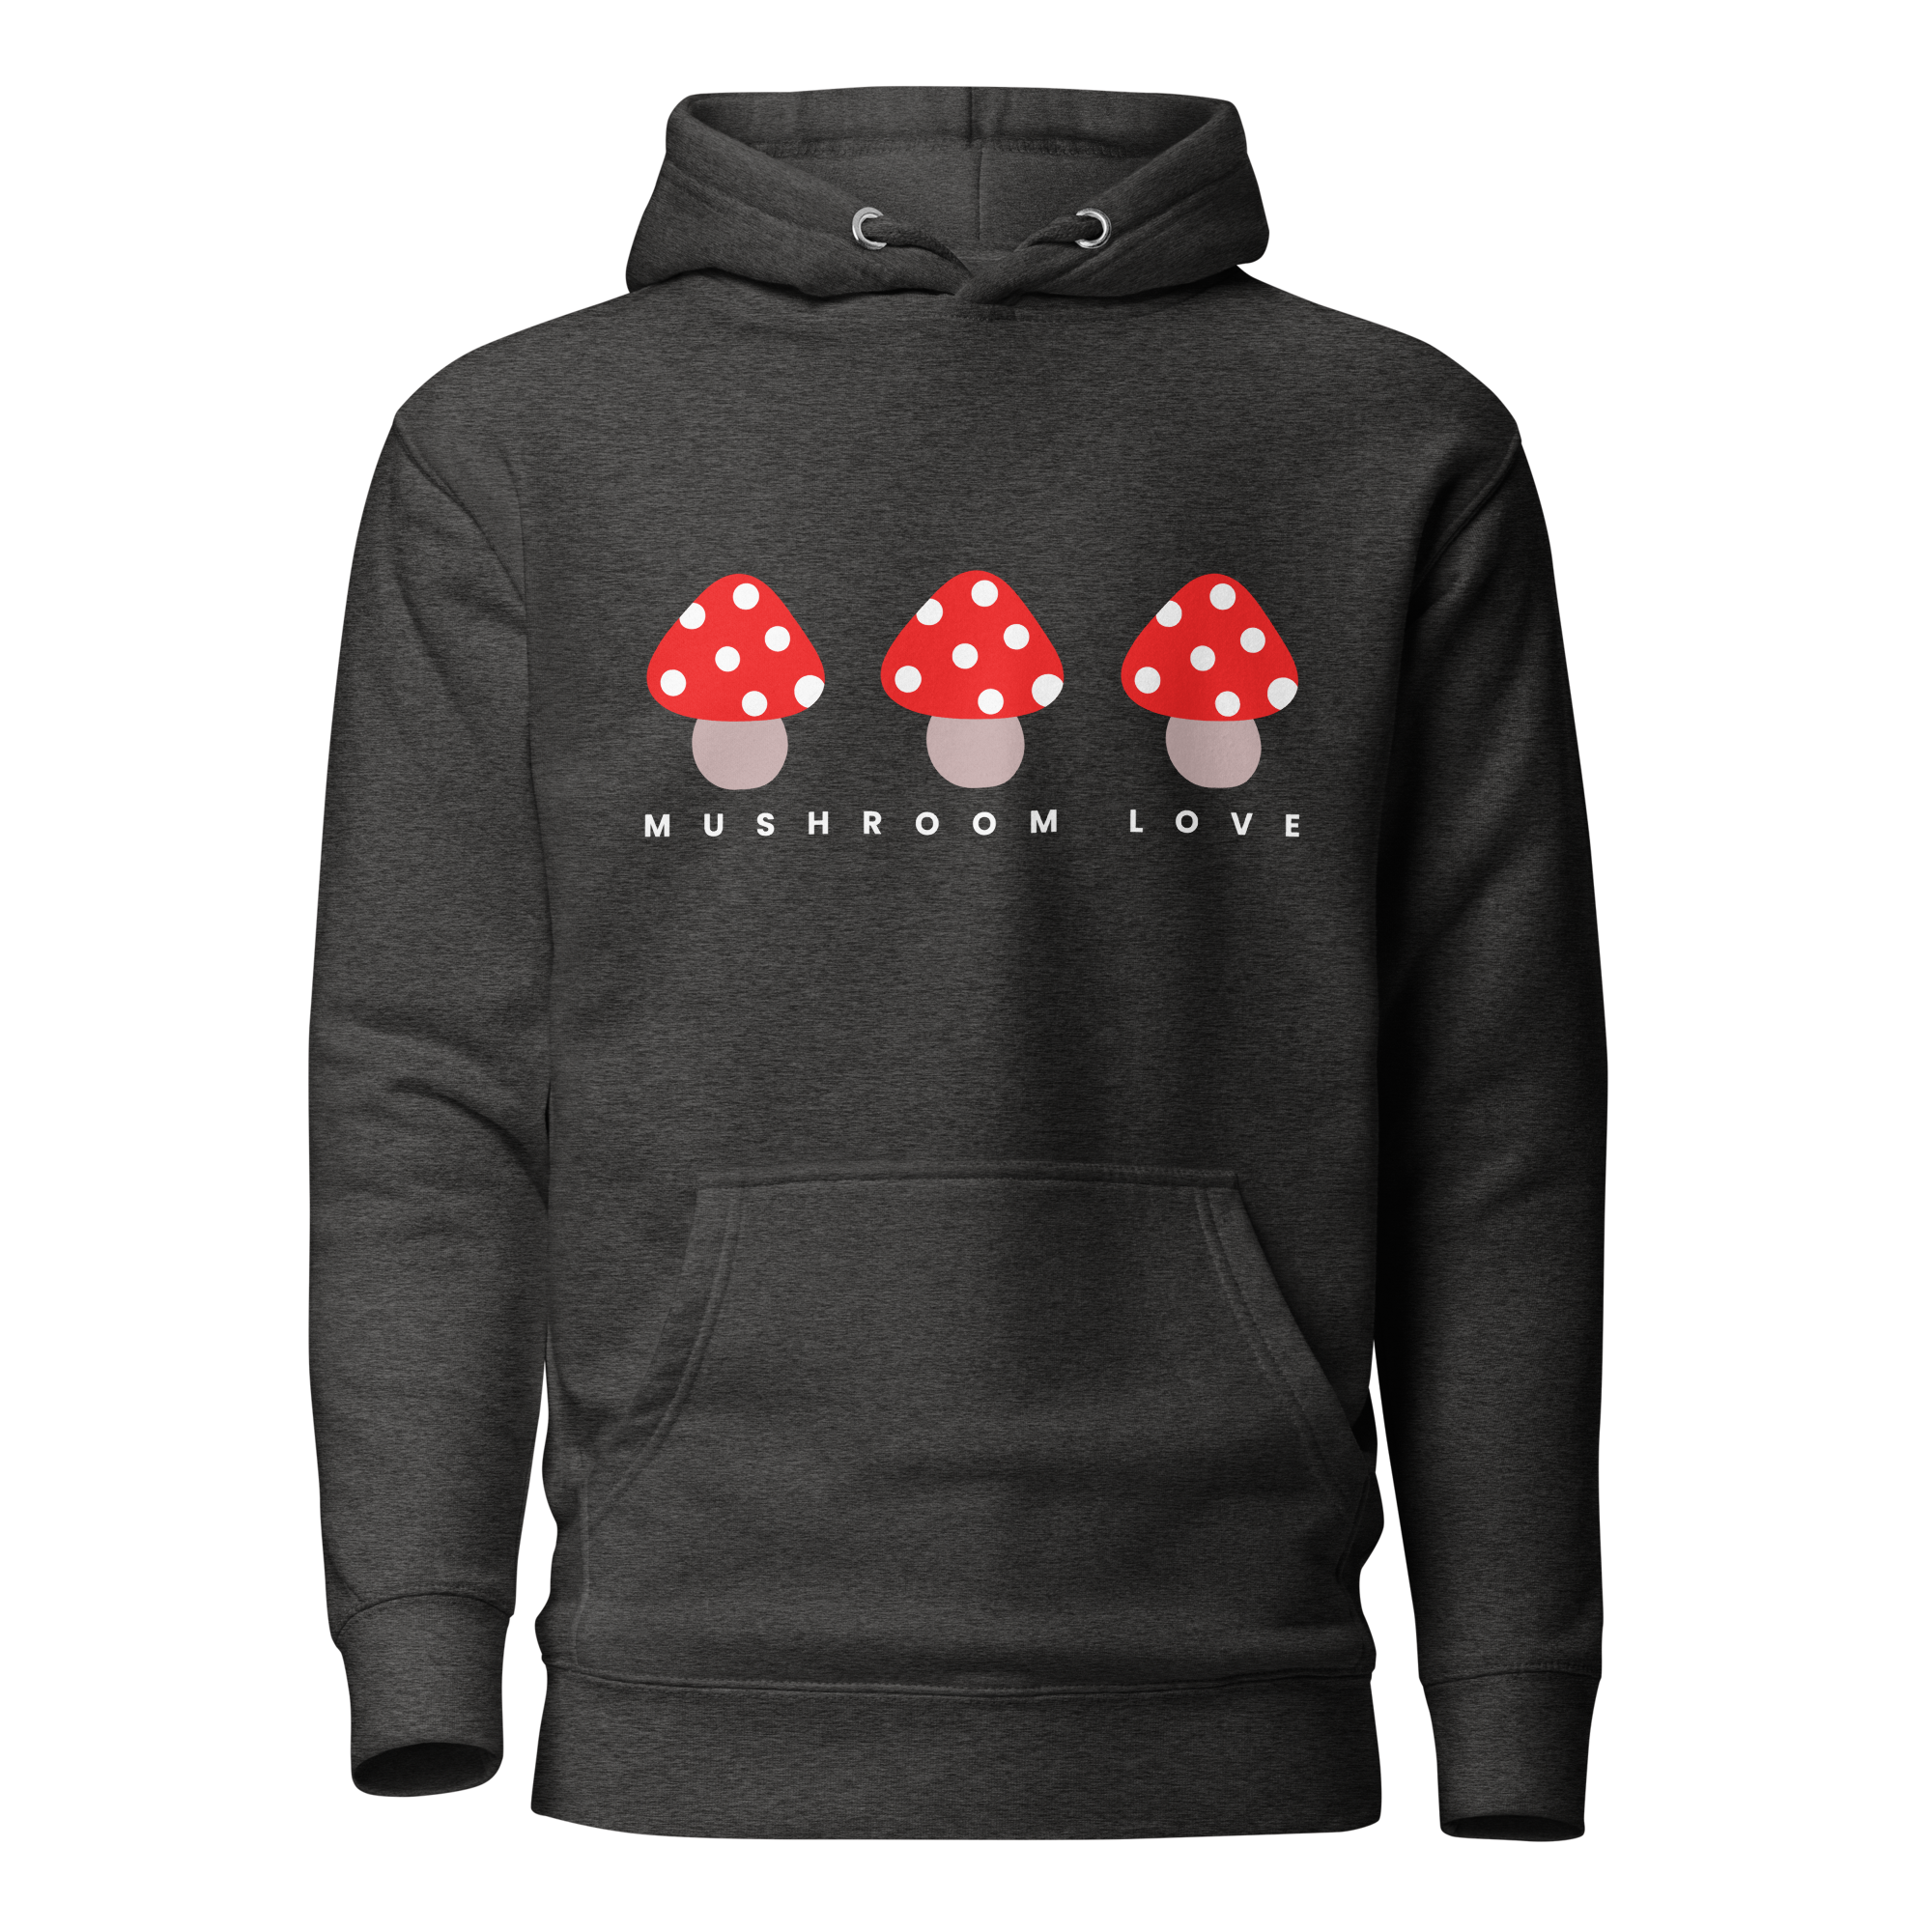 Charcoal Heather Mushroom Love Graphic Hoodie Front View